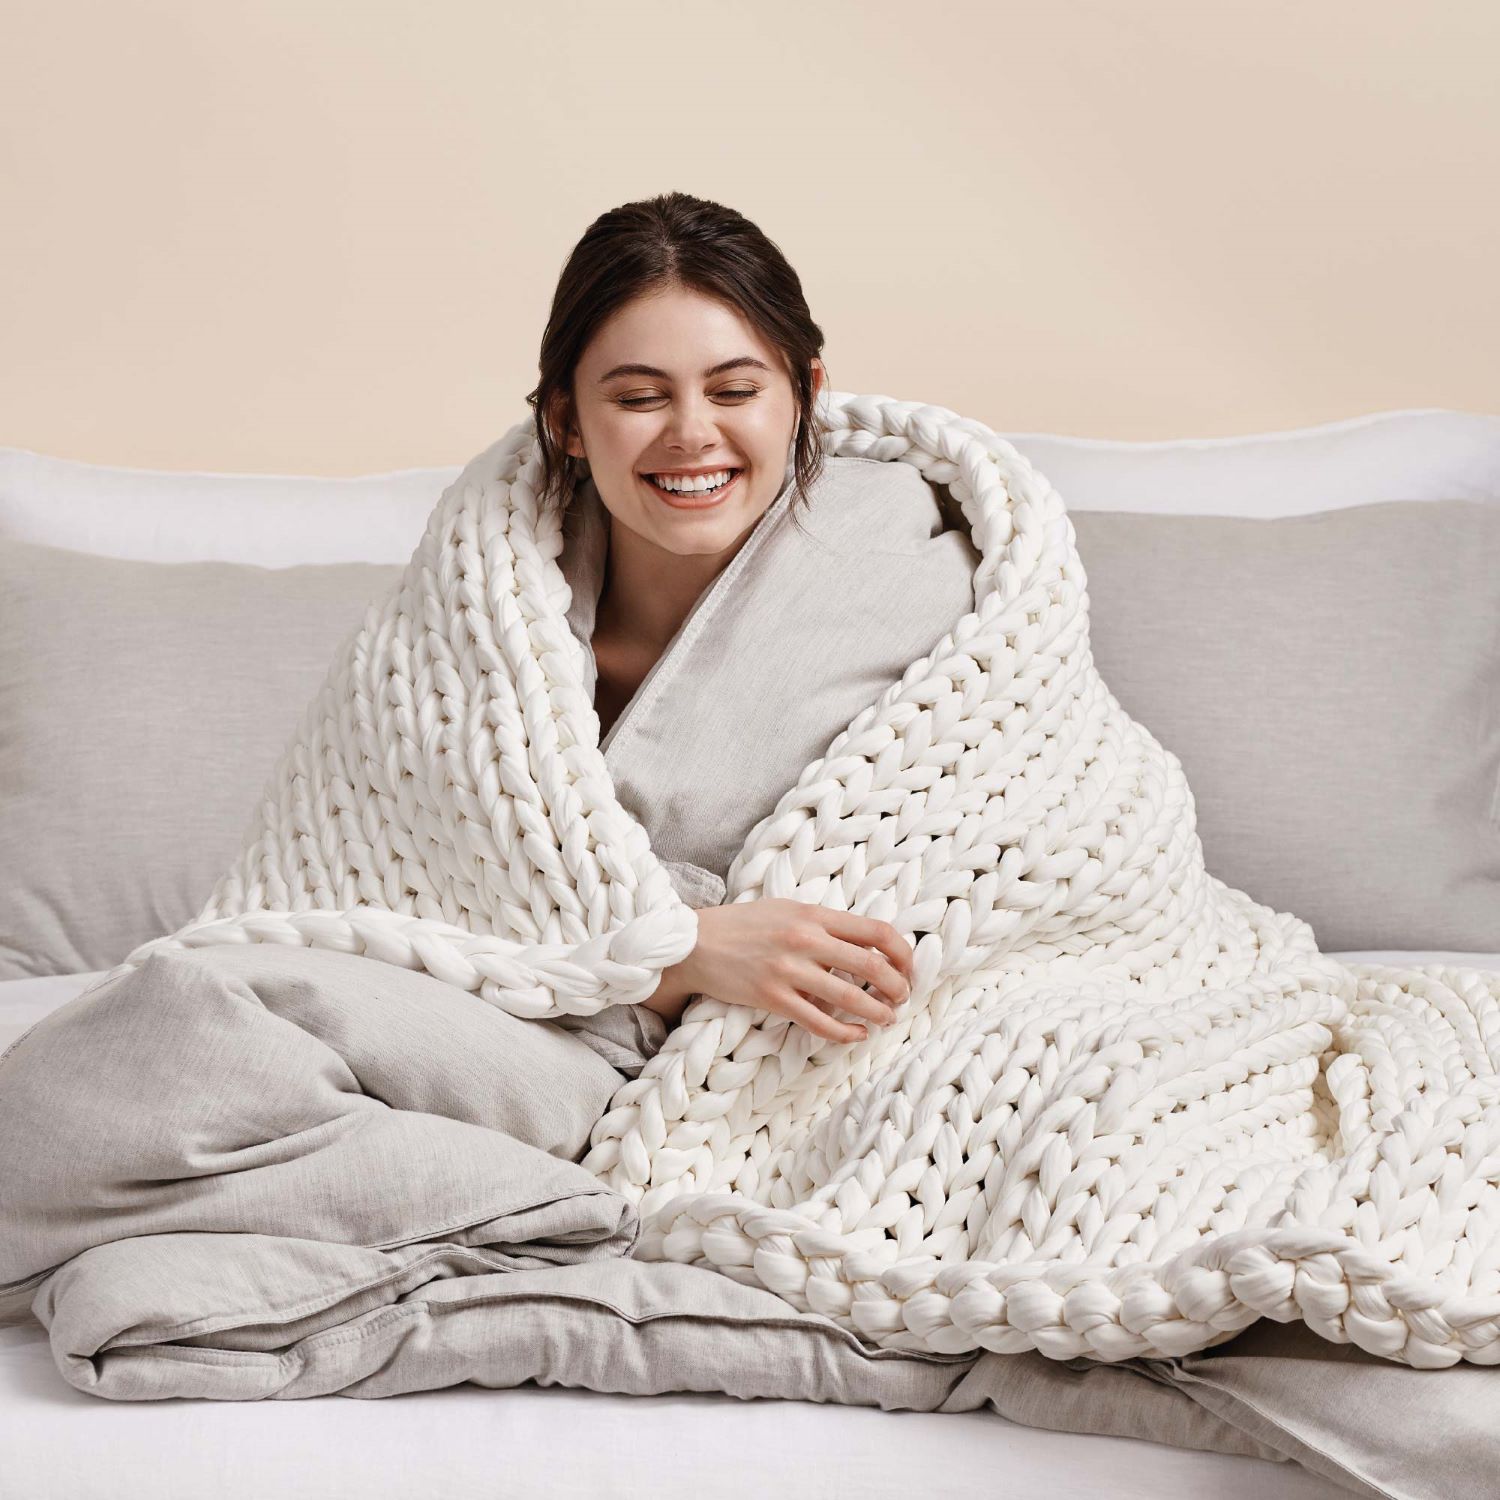 Blanket Vs. Comforter: What’s The Difference?